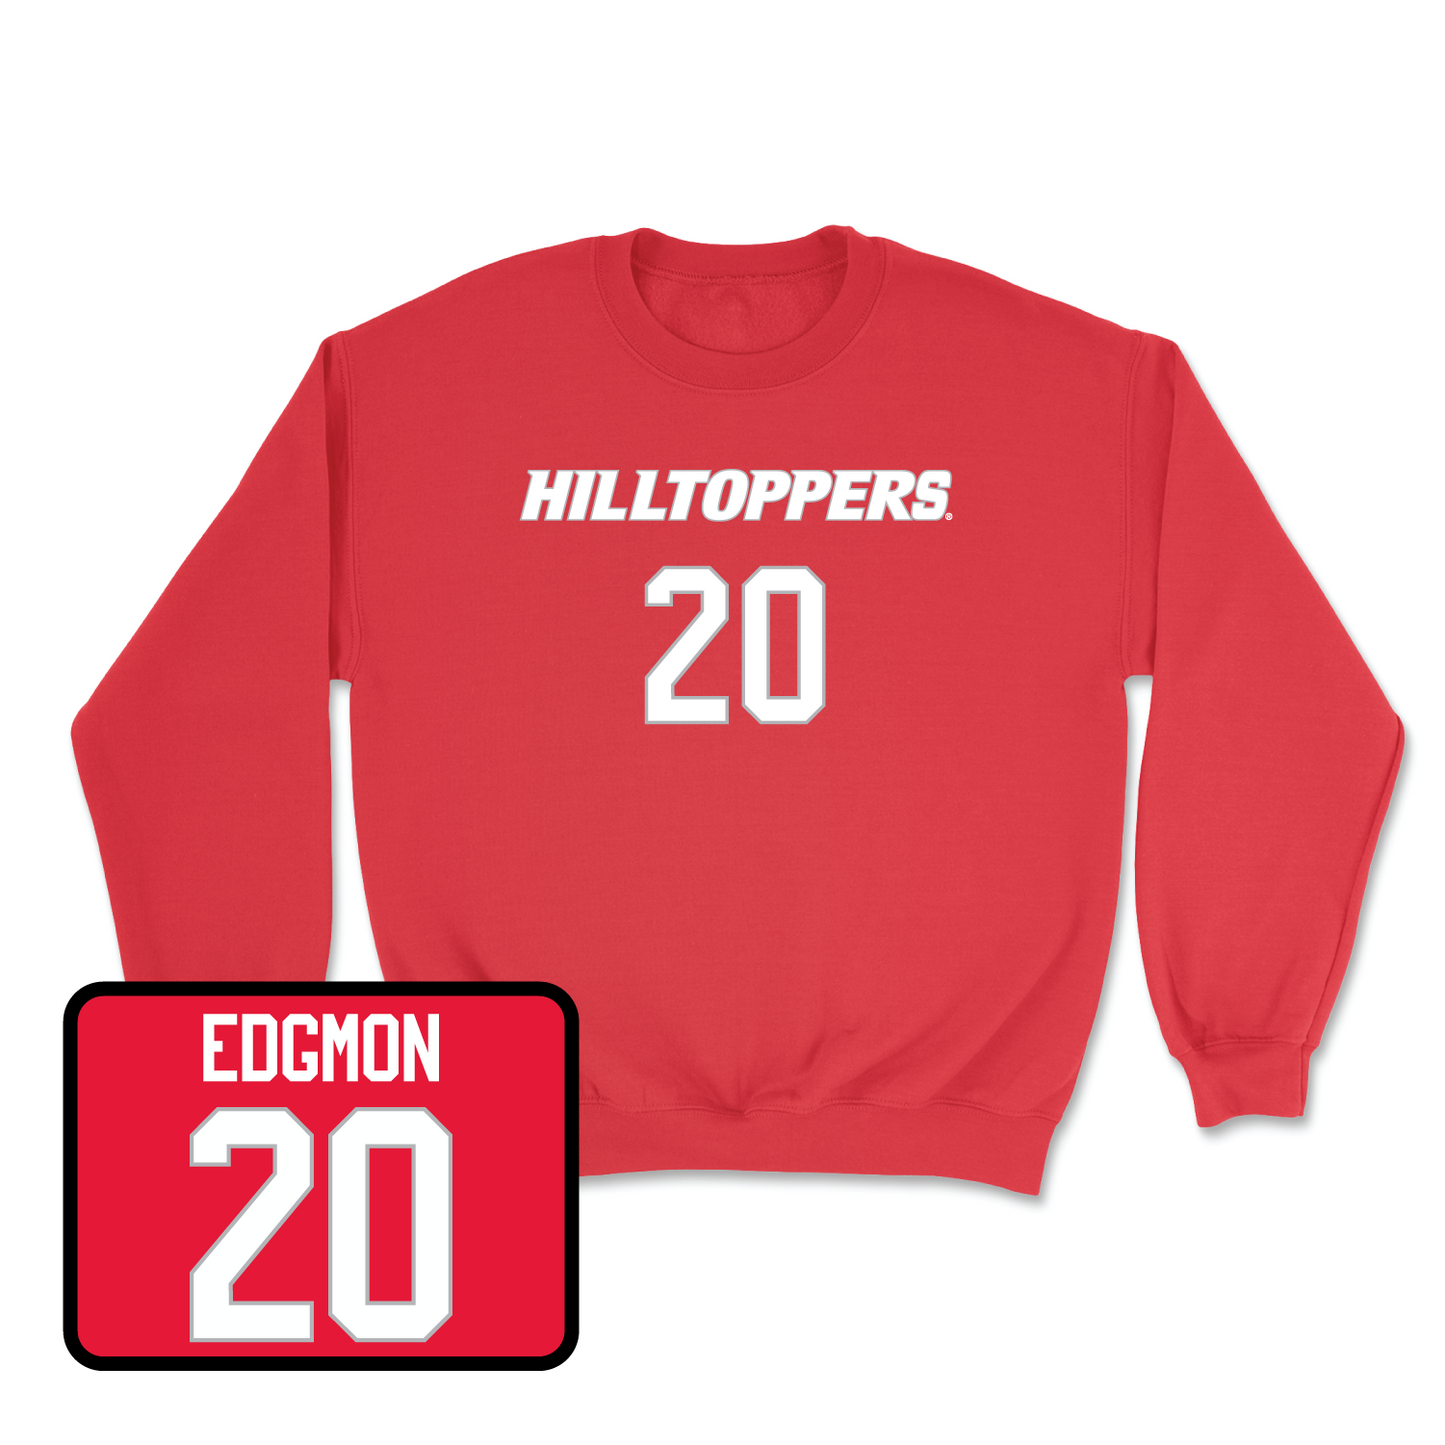 Red Softball Hilltoppers Player Crew